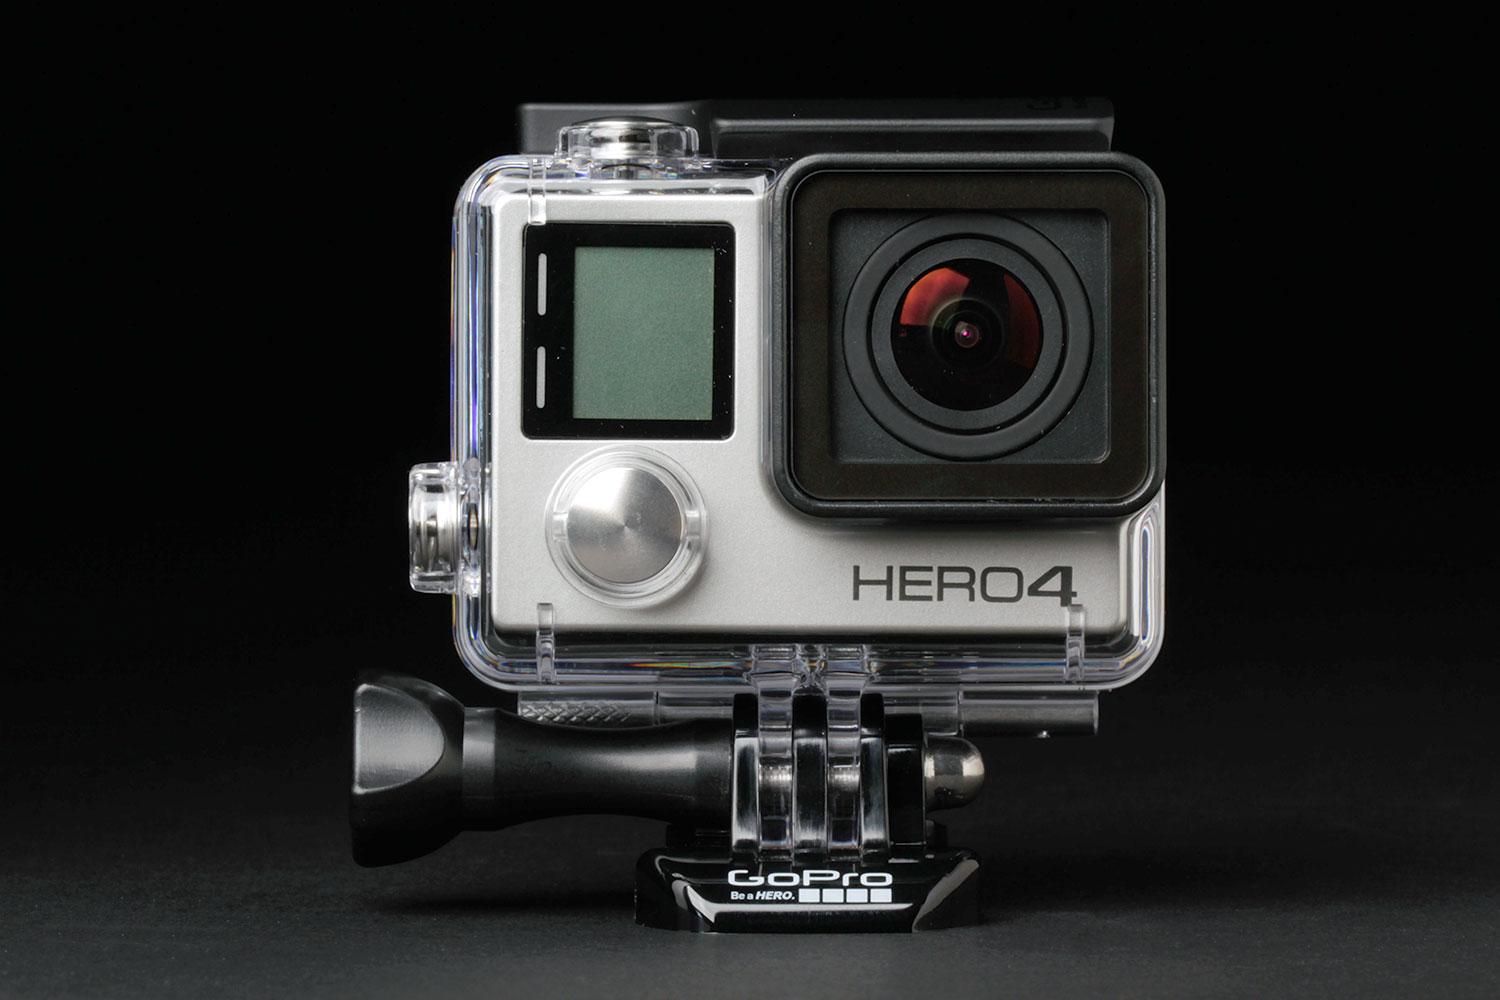 GoPro appears to be going nowhere